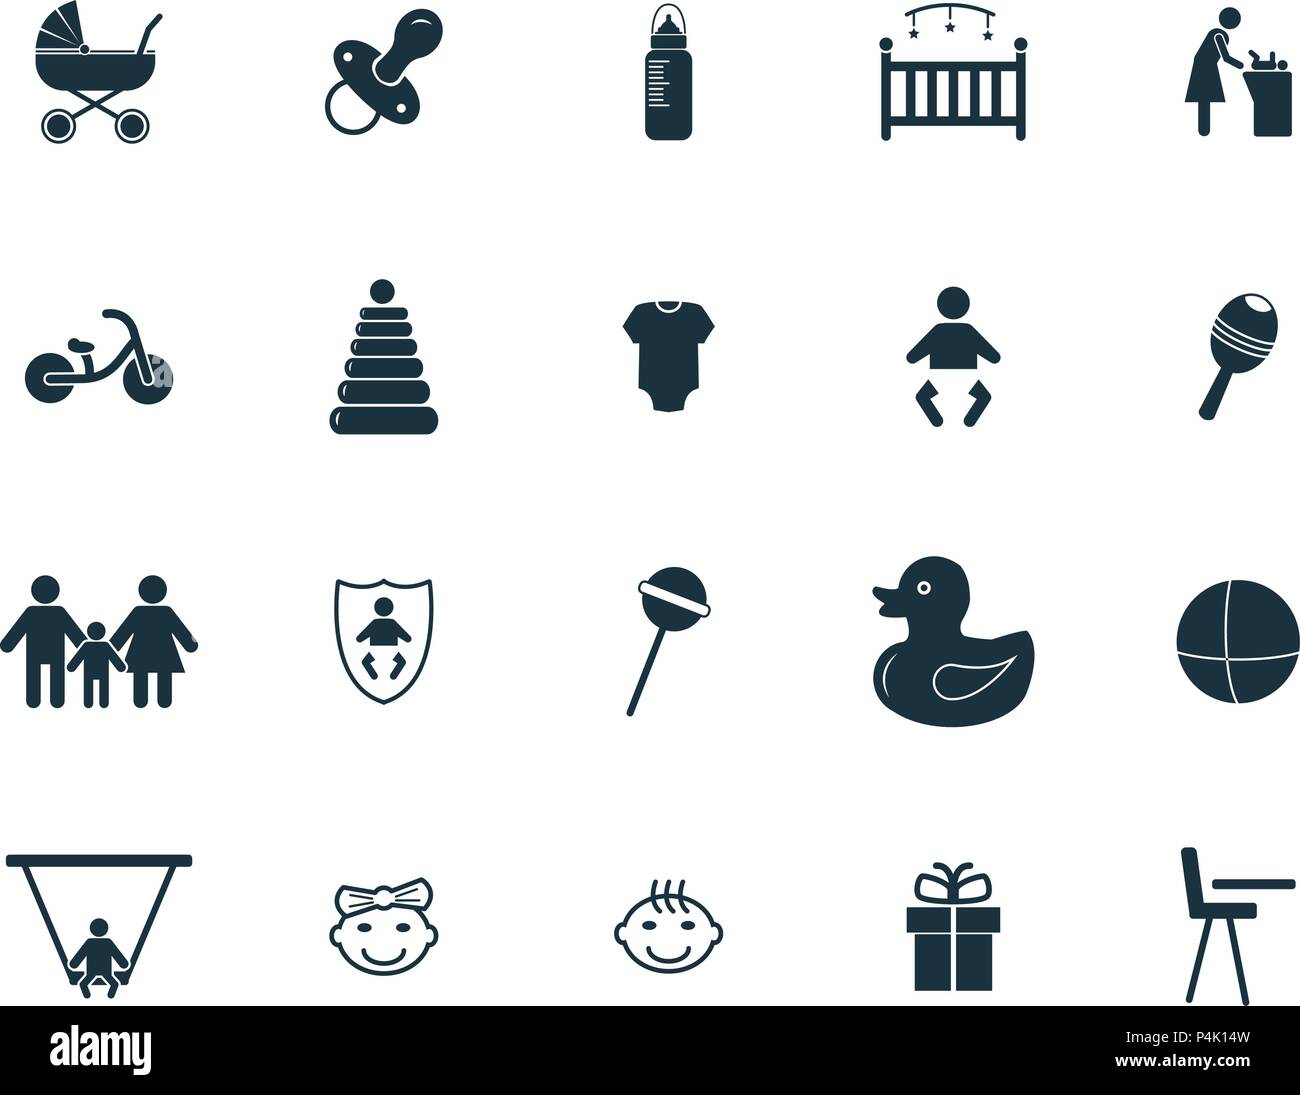 Baby icons set. Premium quality symbol collection. Baby icon set simple elements. Stock Vector